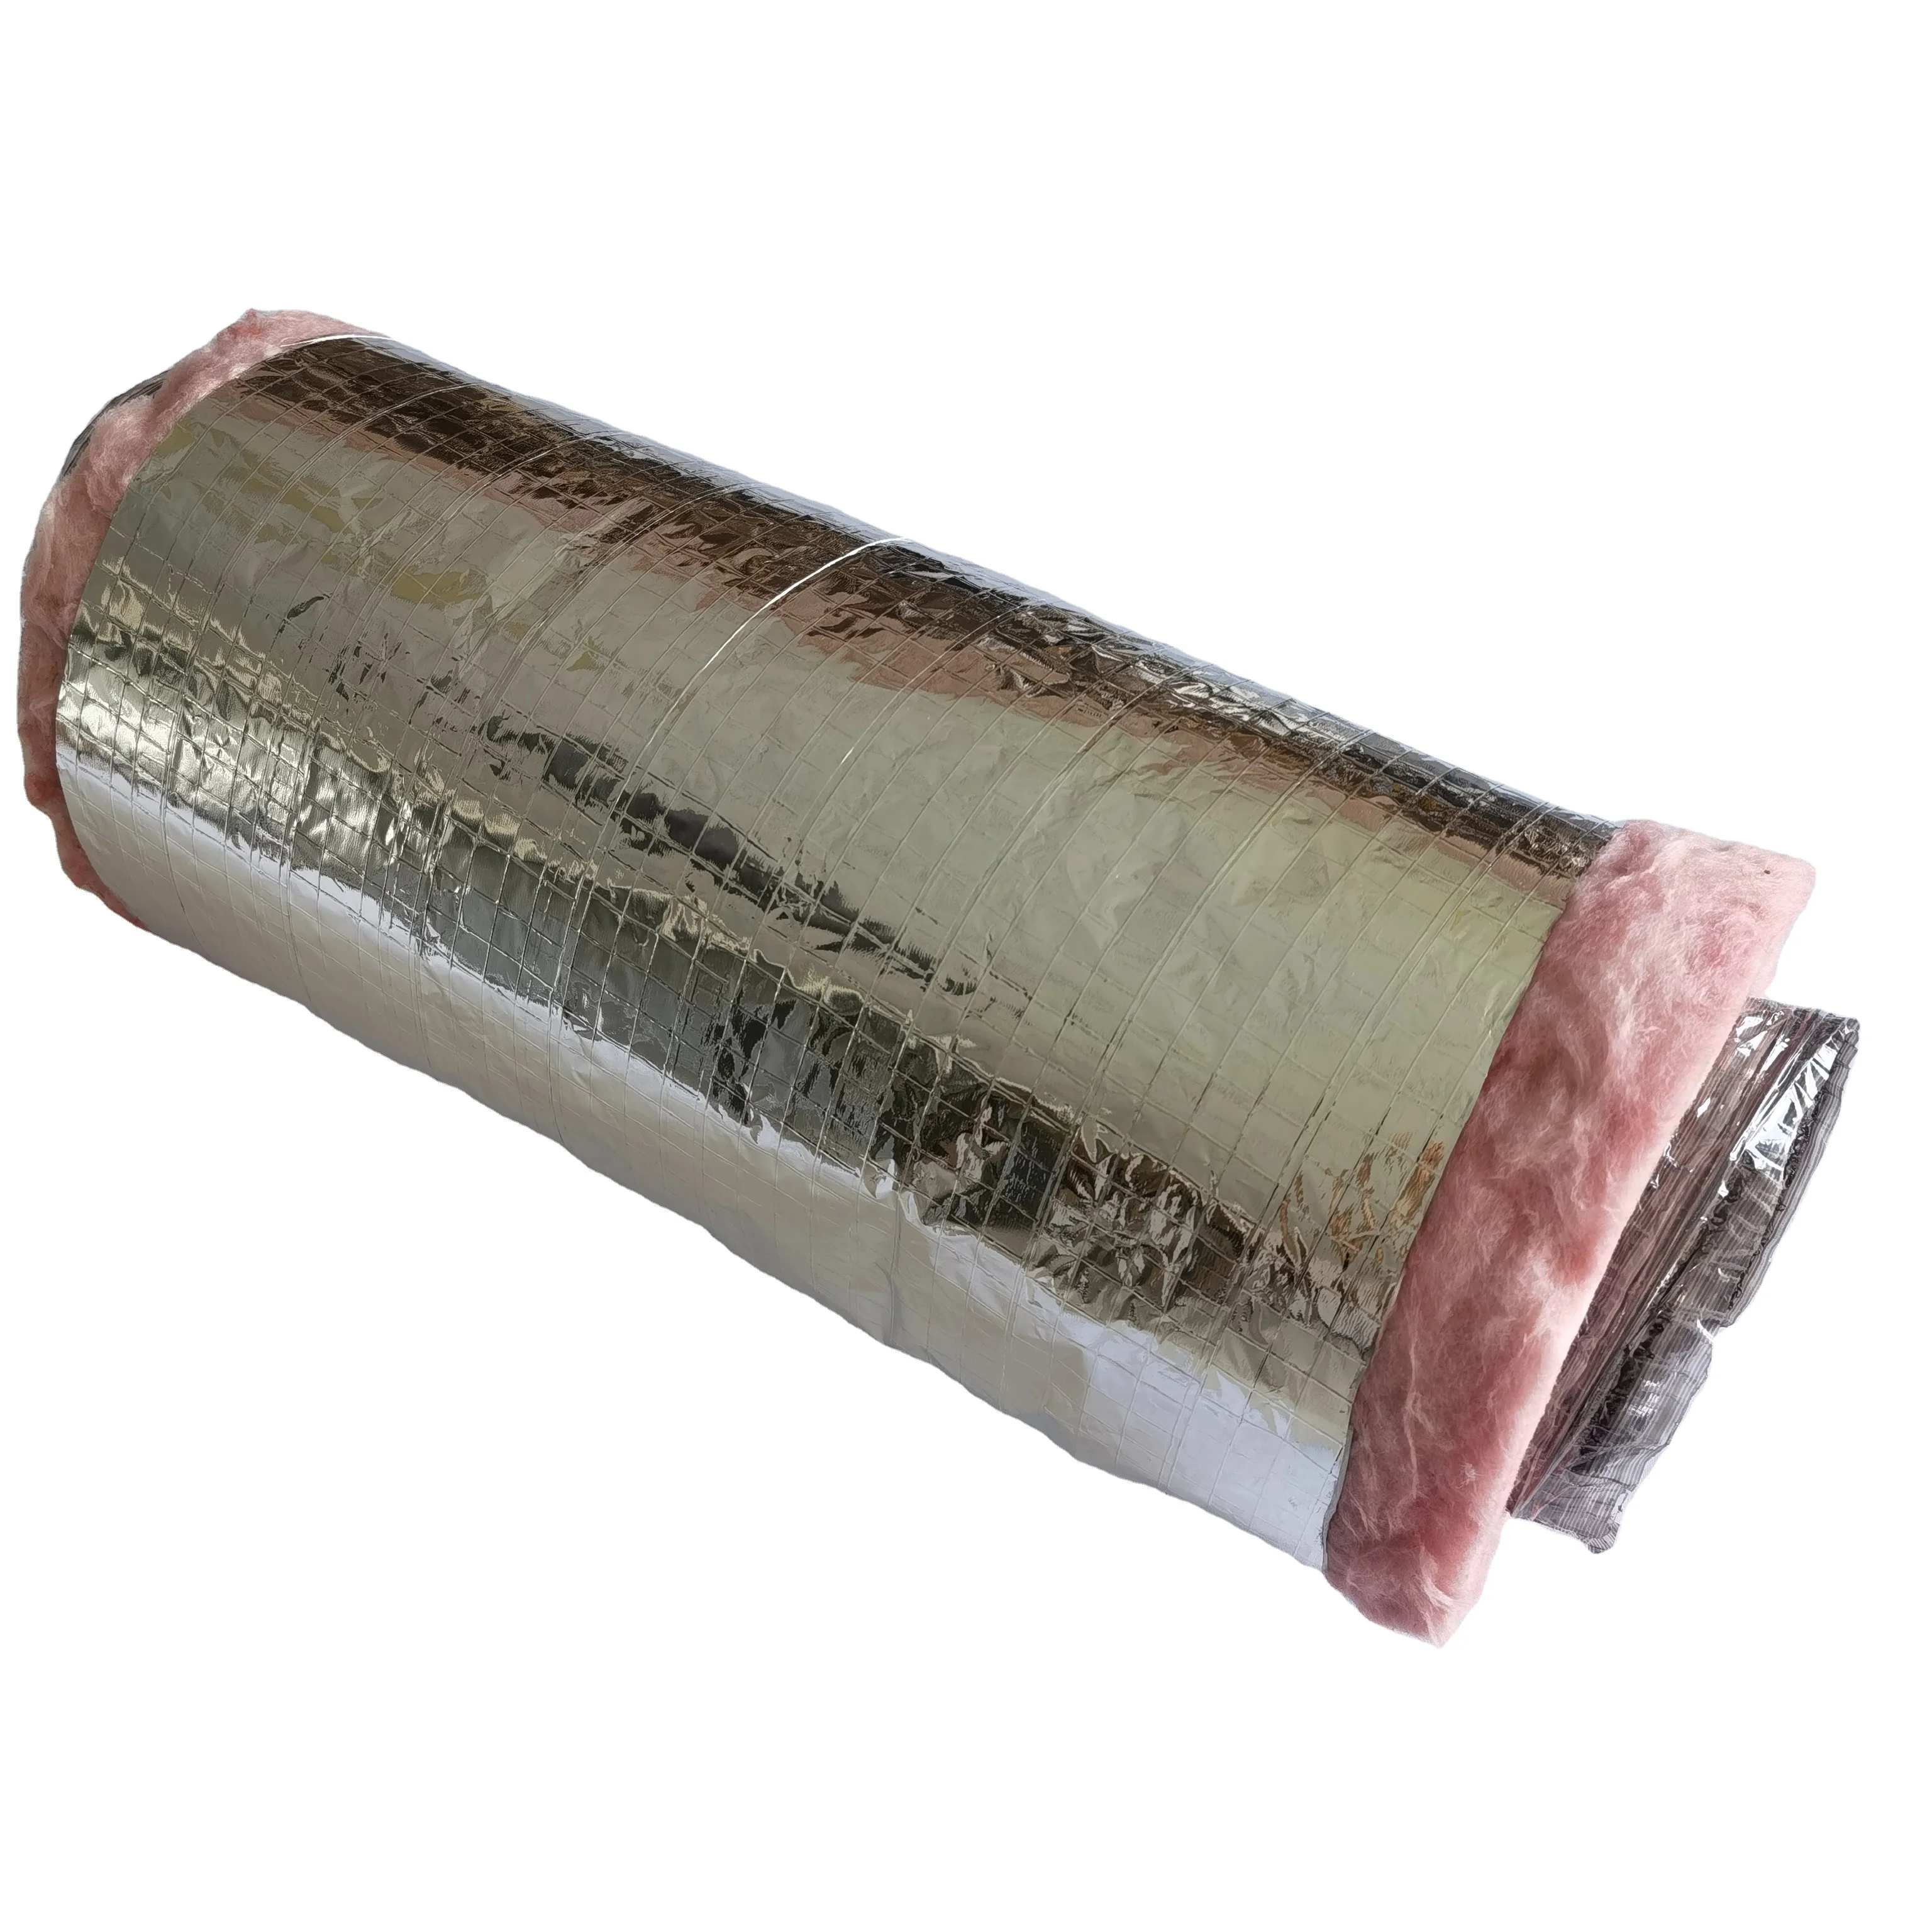 Flexible Duct 25ft And 50ft Bags All Sizes R4r6r86 Flex Duct All Size Insulated Duct Buy 5769